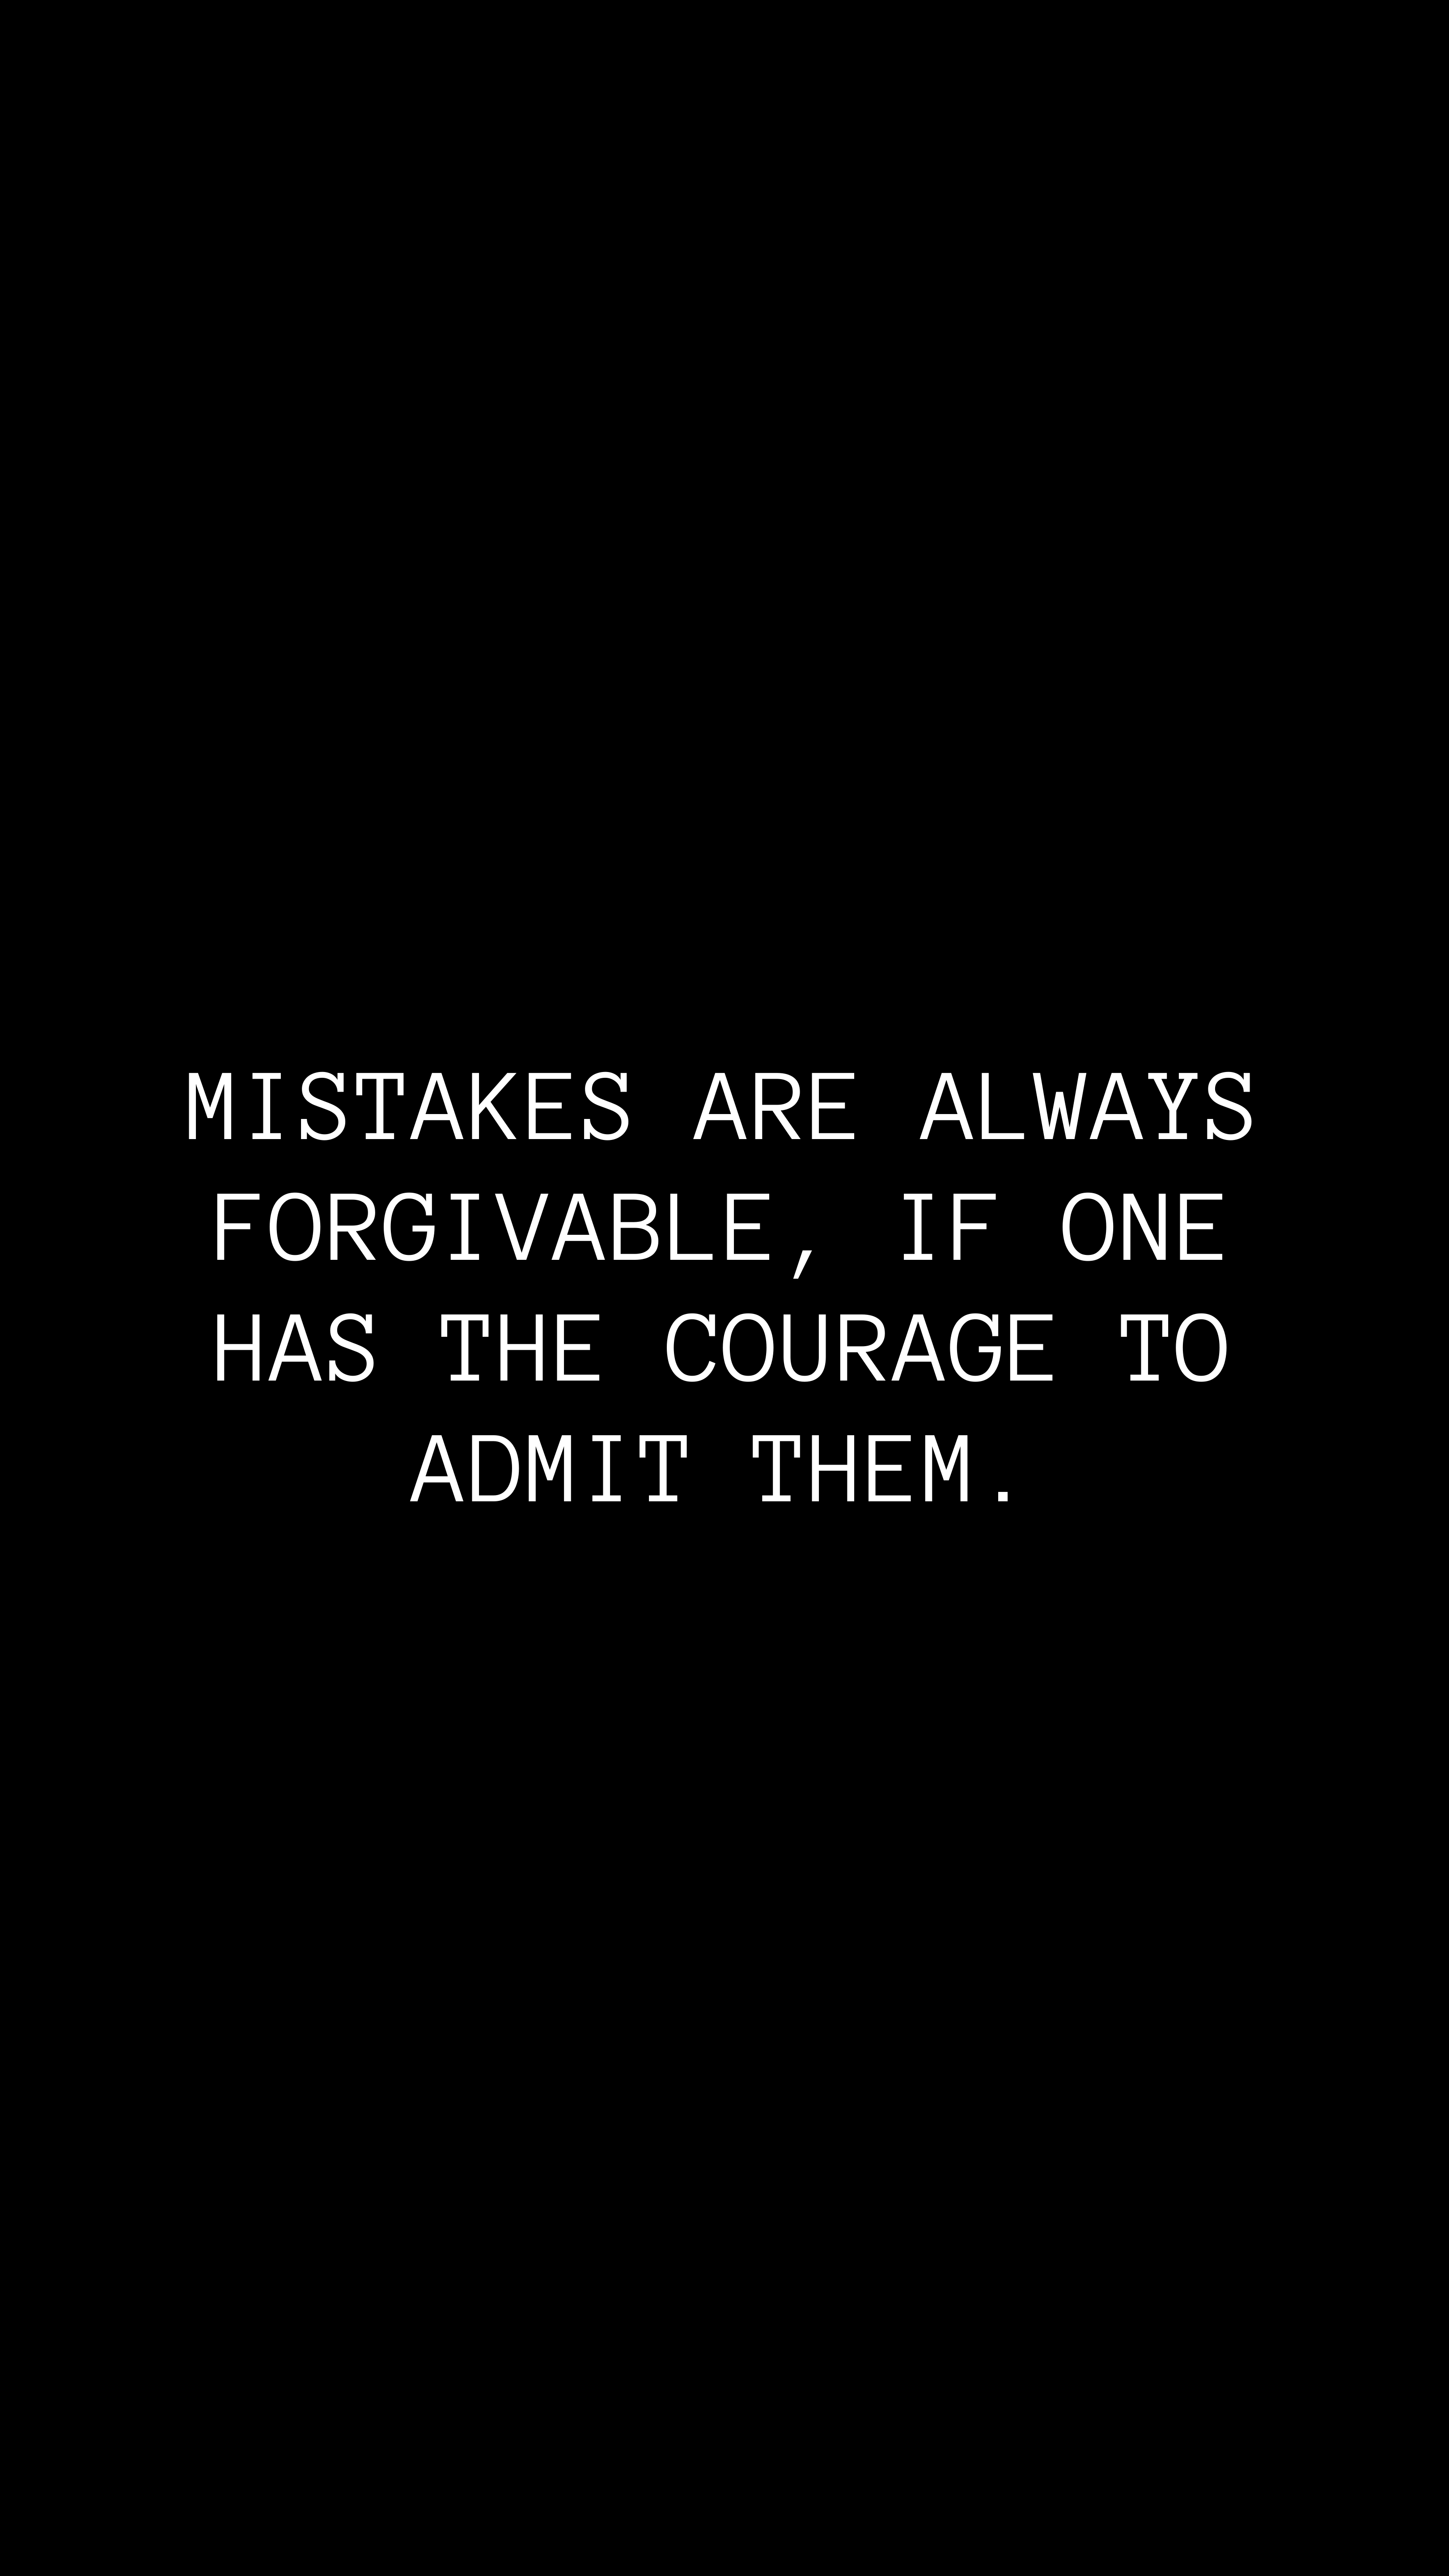 quote, words, quotation, phrase, utterance, errors, courage wallpapers for tablet